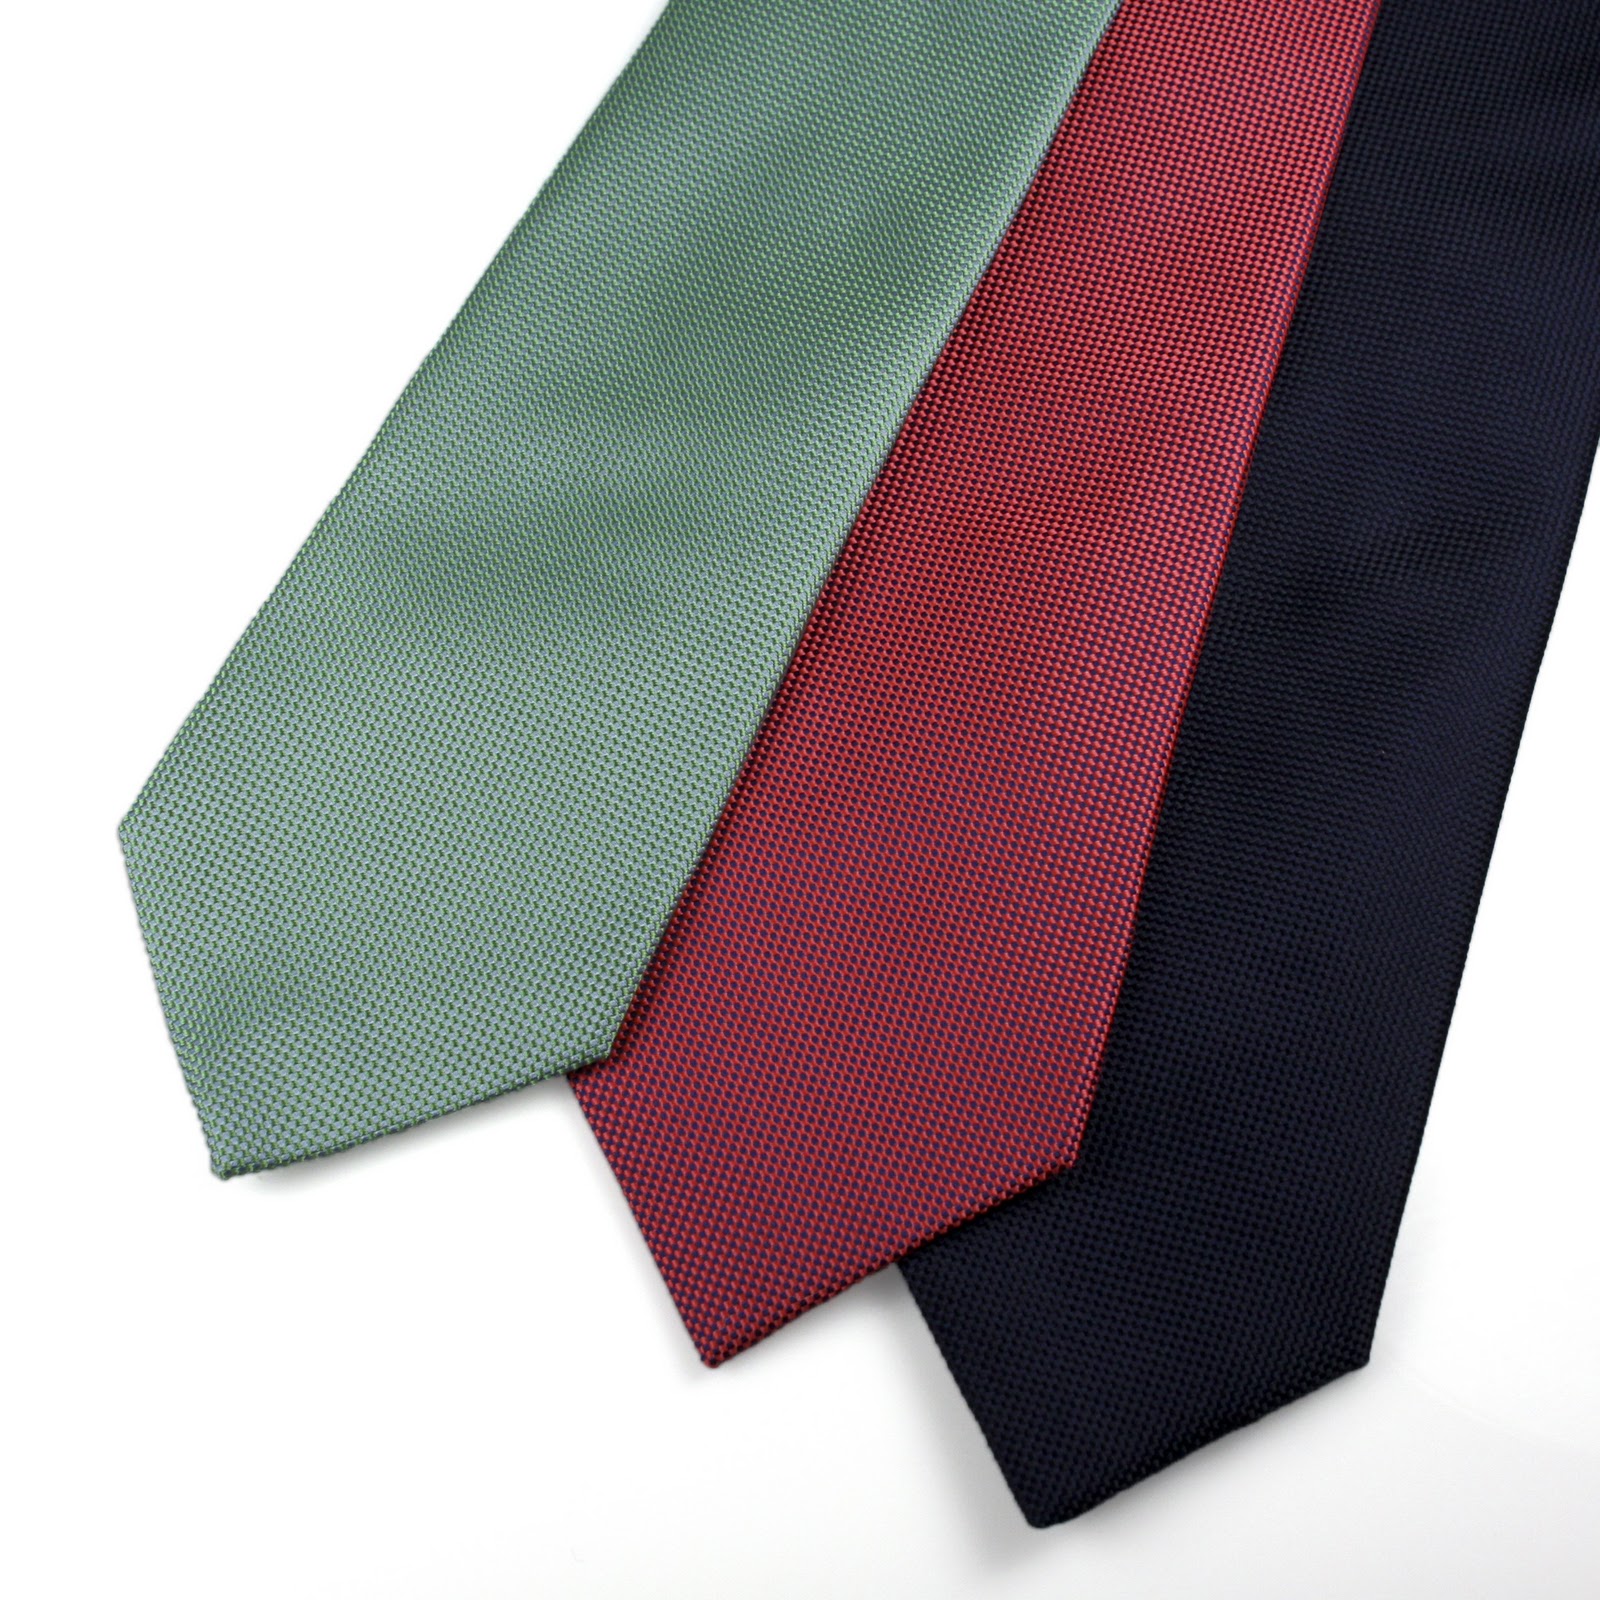 Oxford Weave Neckties - Solution of style inspiration